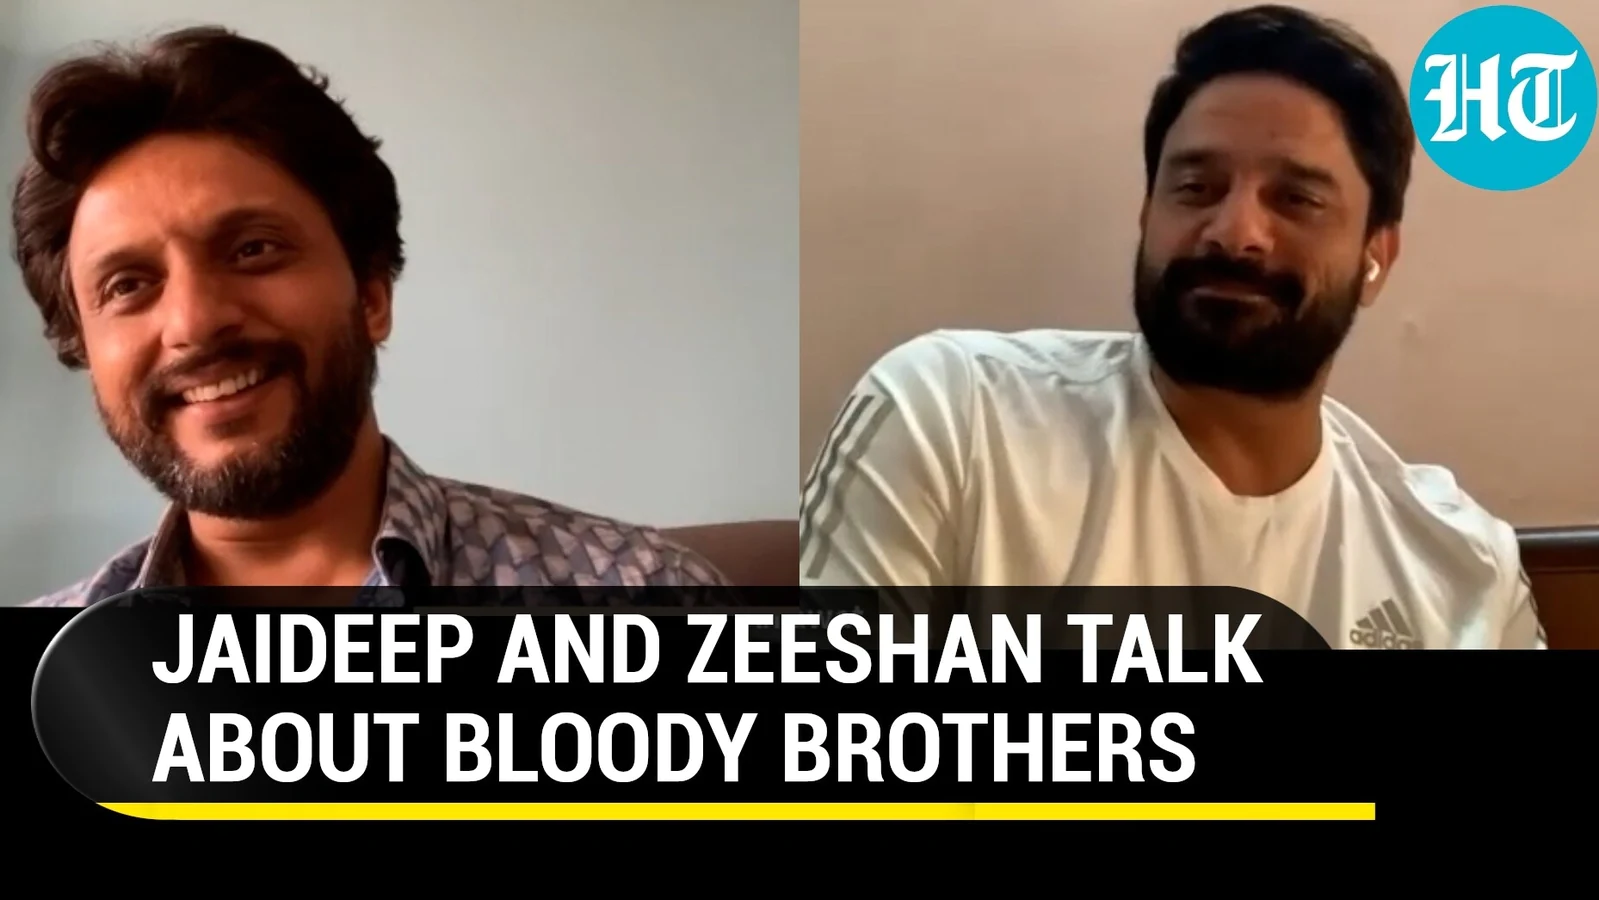 Jaideep Ahlawat and Zeeshan Ayyub talk about their chemistry in Bloody Brothers